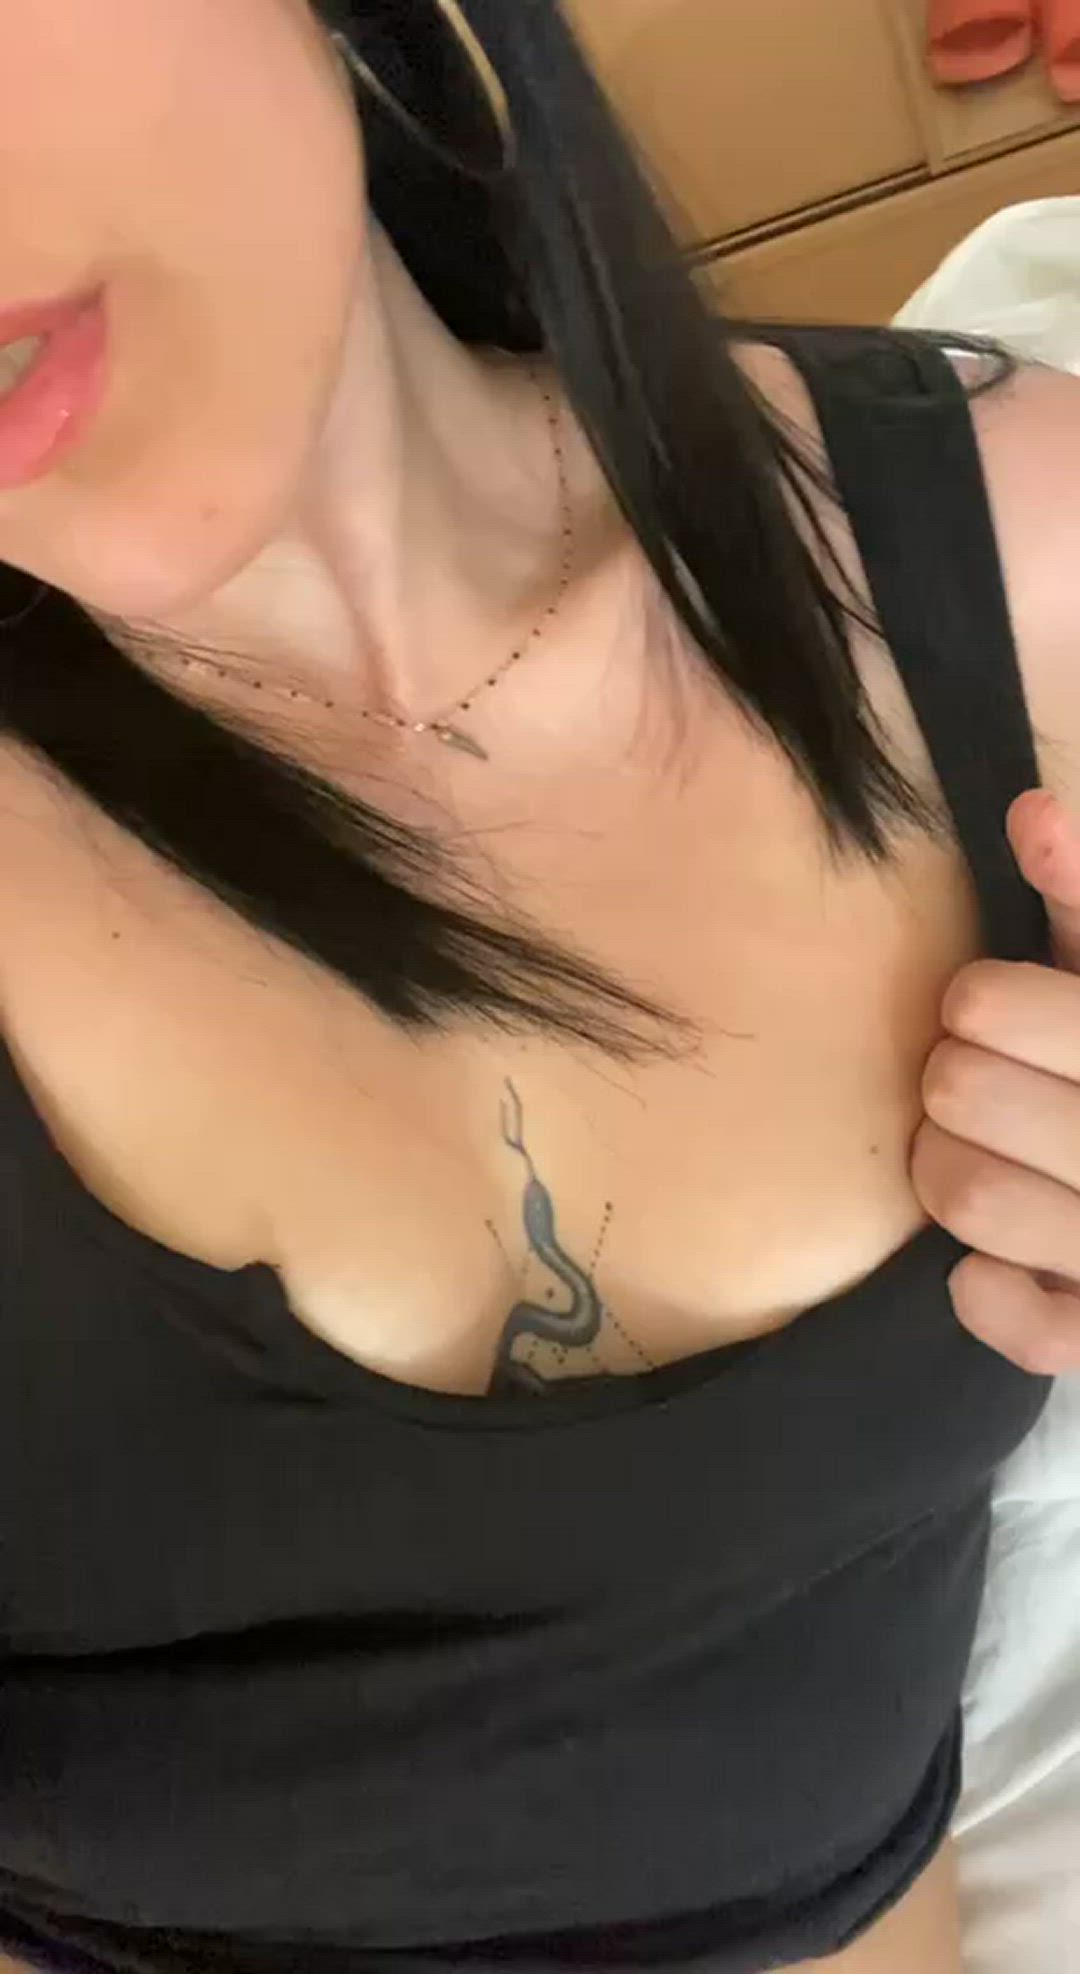 Tits porn video with onlyfans model gioiaredd <strong>@gioiaredd</strong>